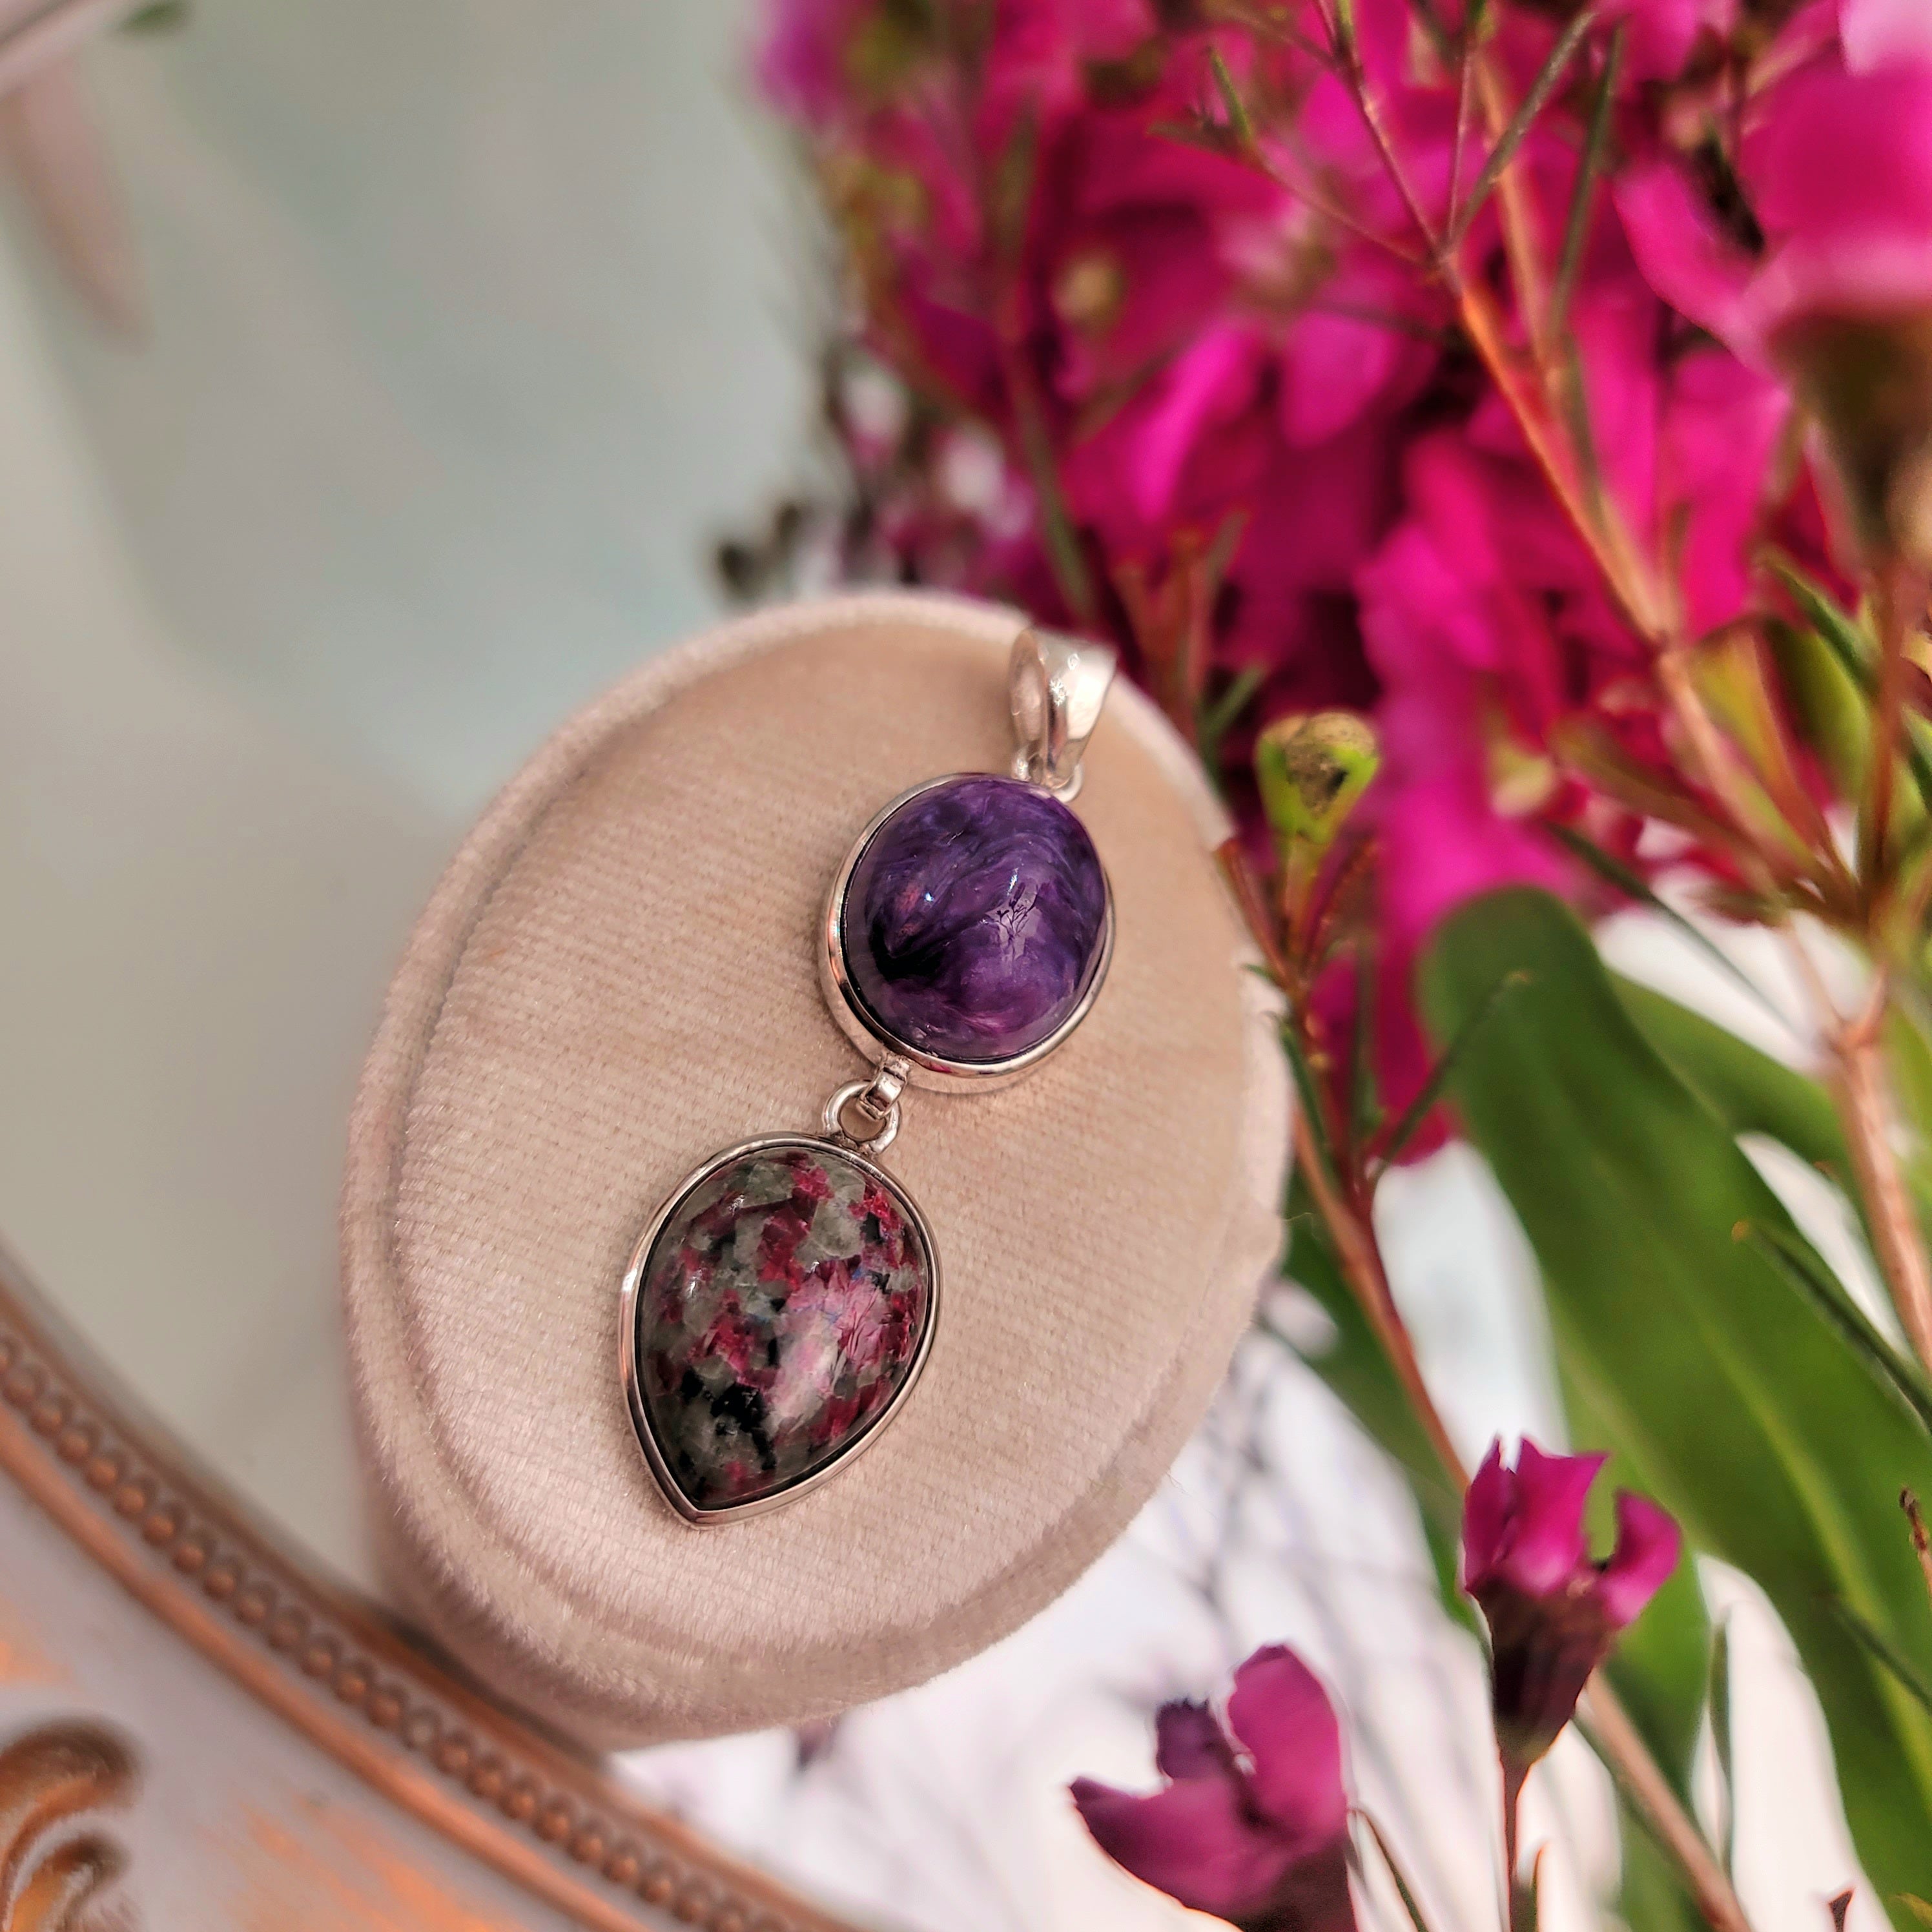 Charoite & Eudialyte Pendant for Connection with the Divine Source and your Higher Self